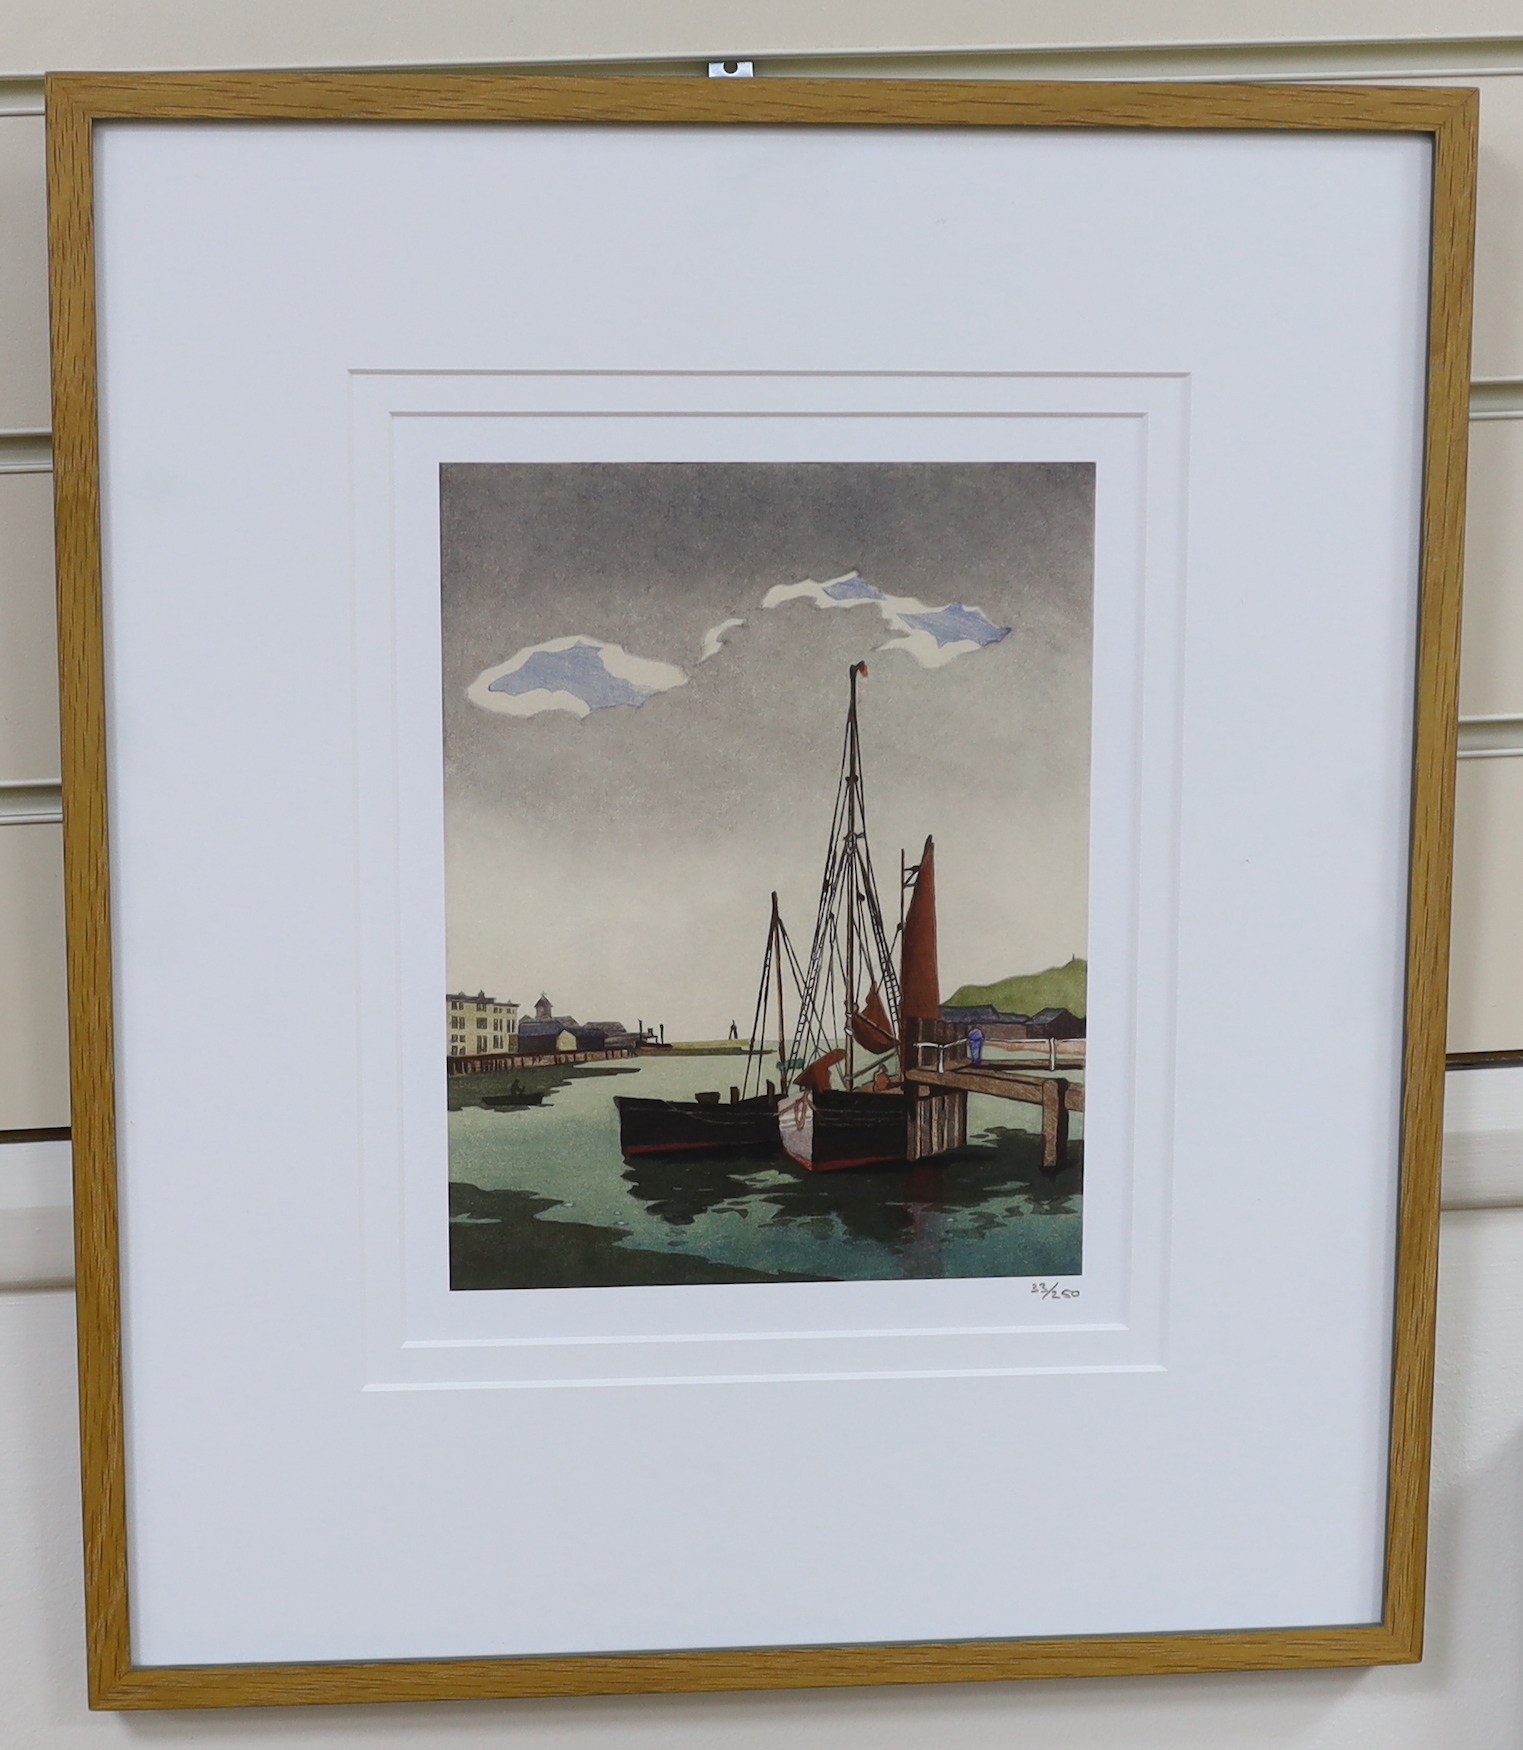 Eric Slater (British, 1896-1963), giclee print, limited edition, 33/250, Fishing boats, details and signature verso, 26 x 20cm